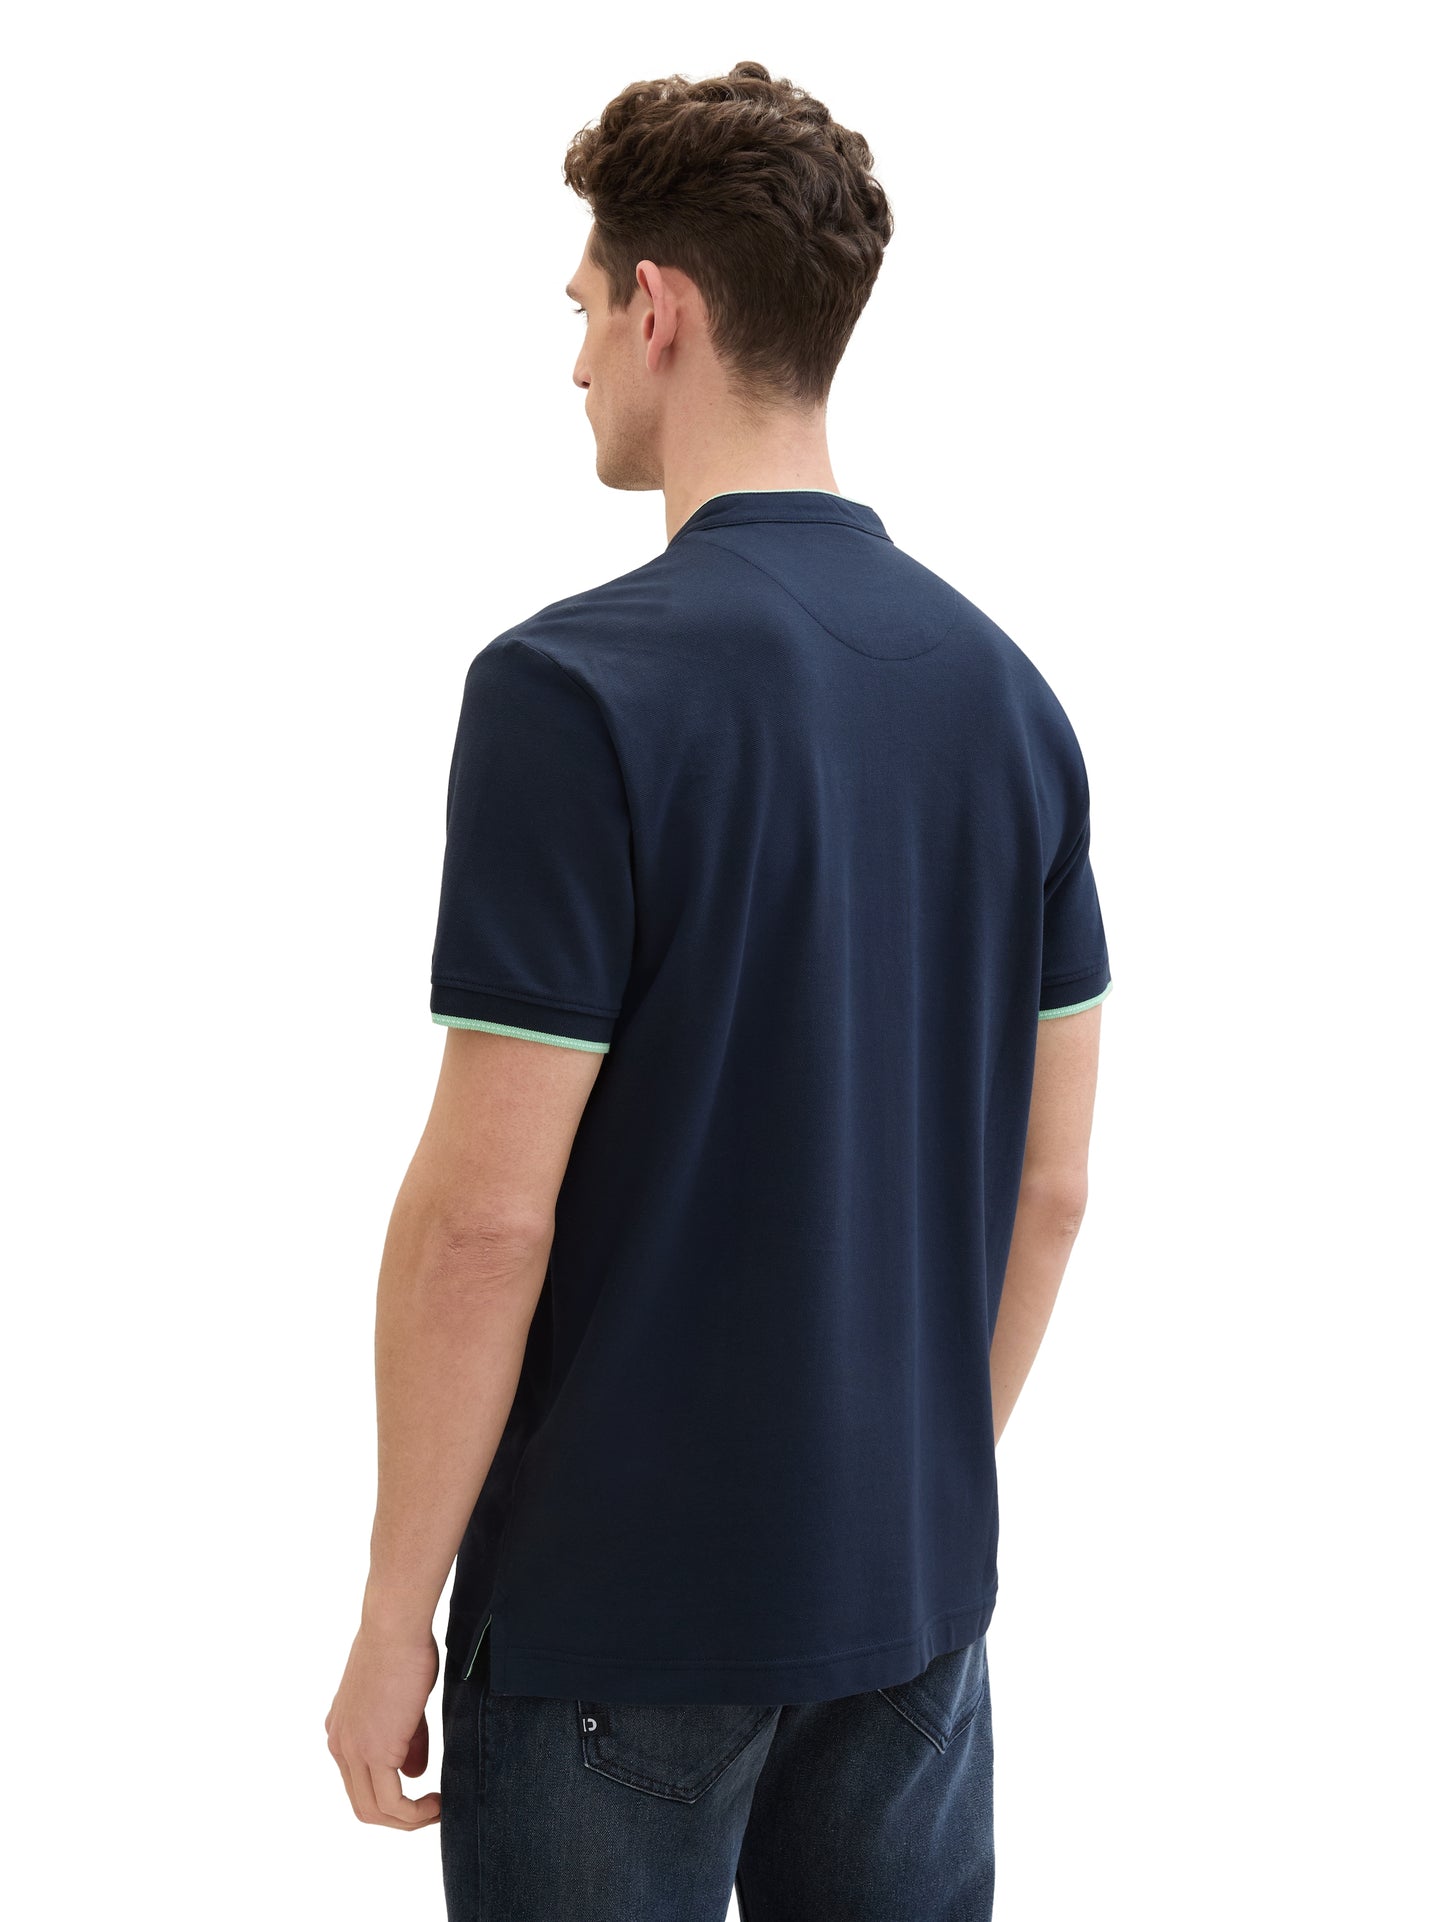 detailed stand-up polo - 1040948